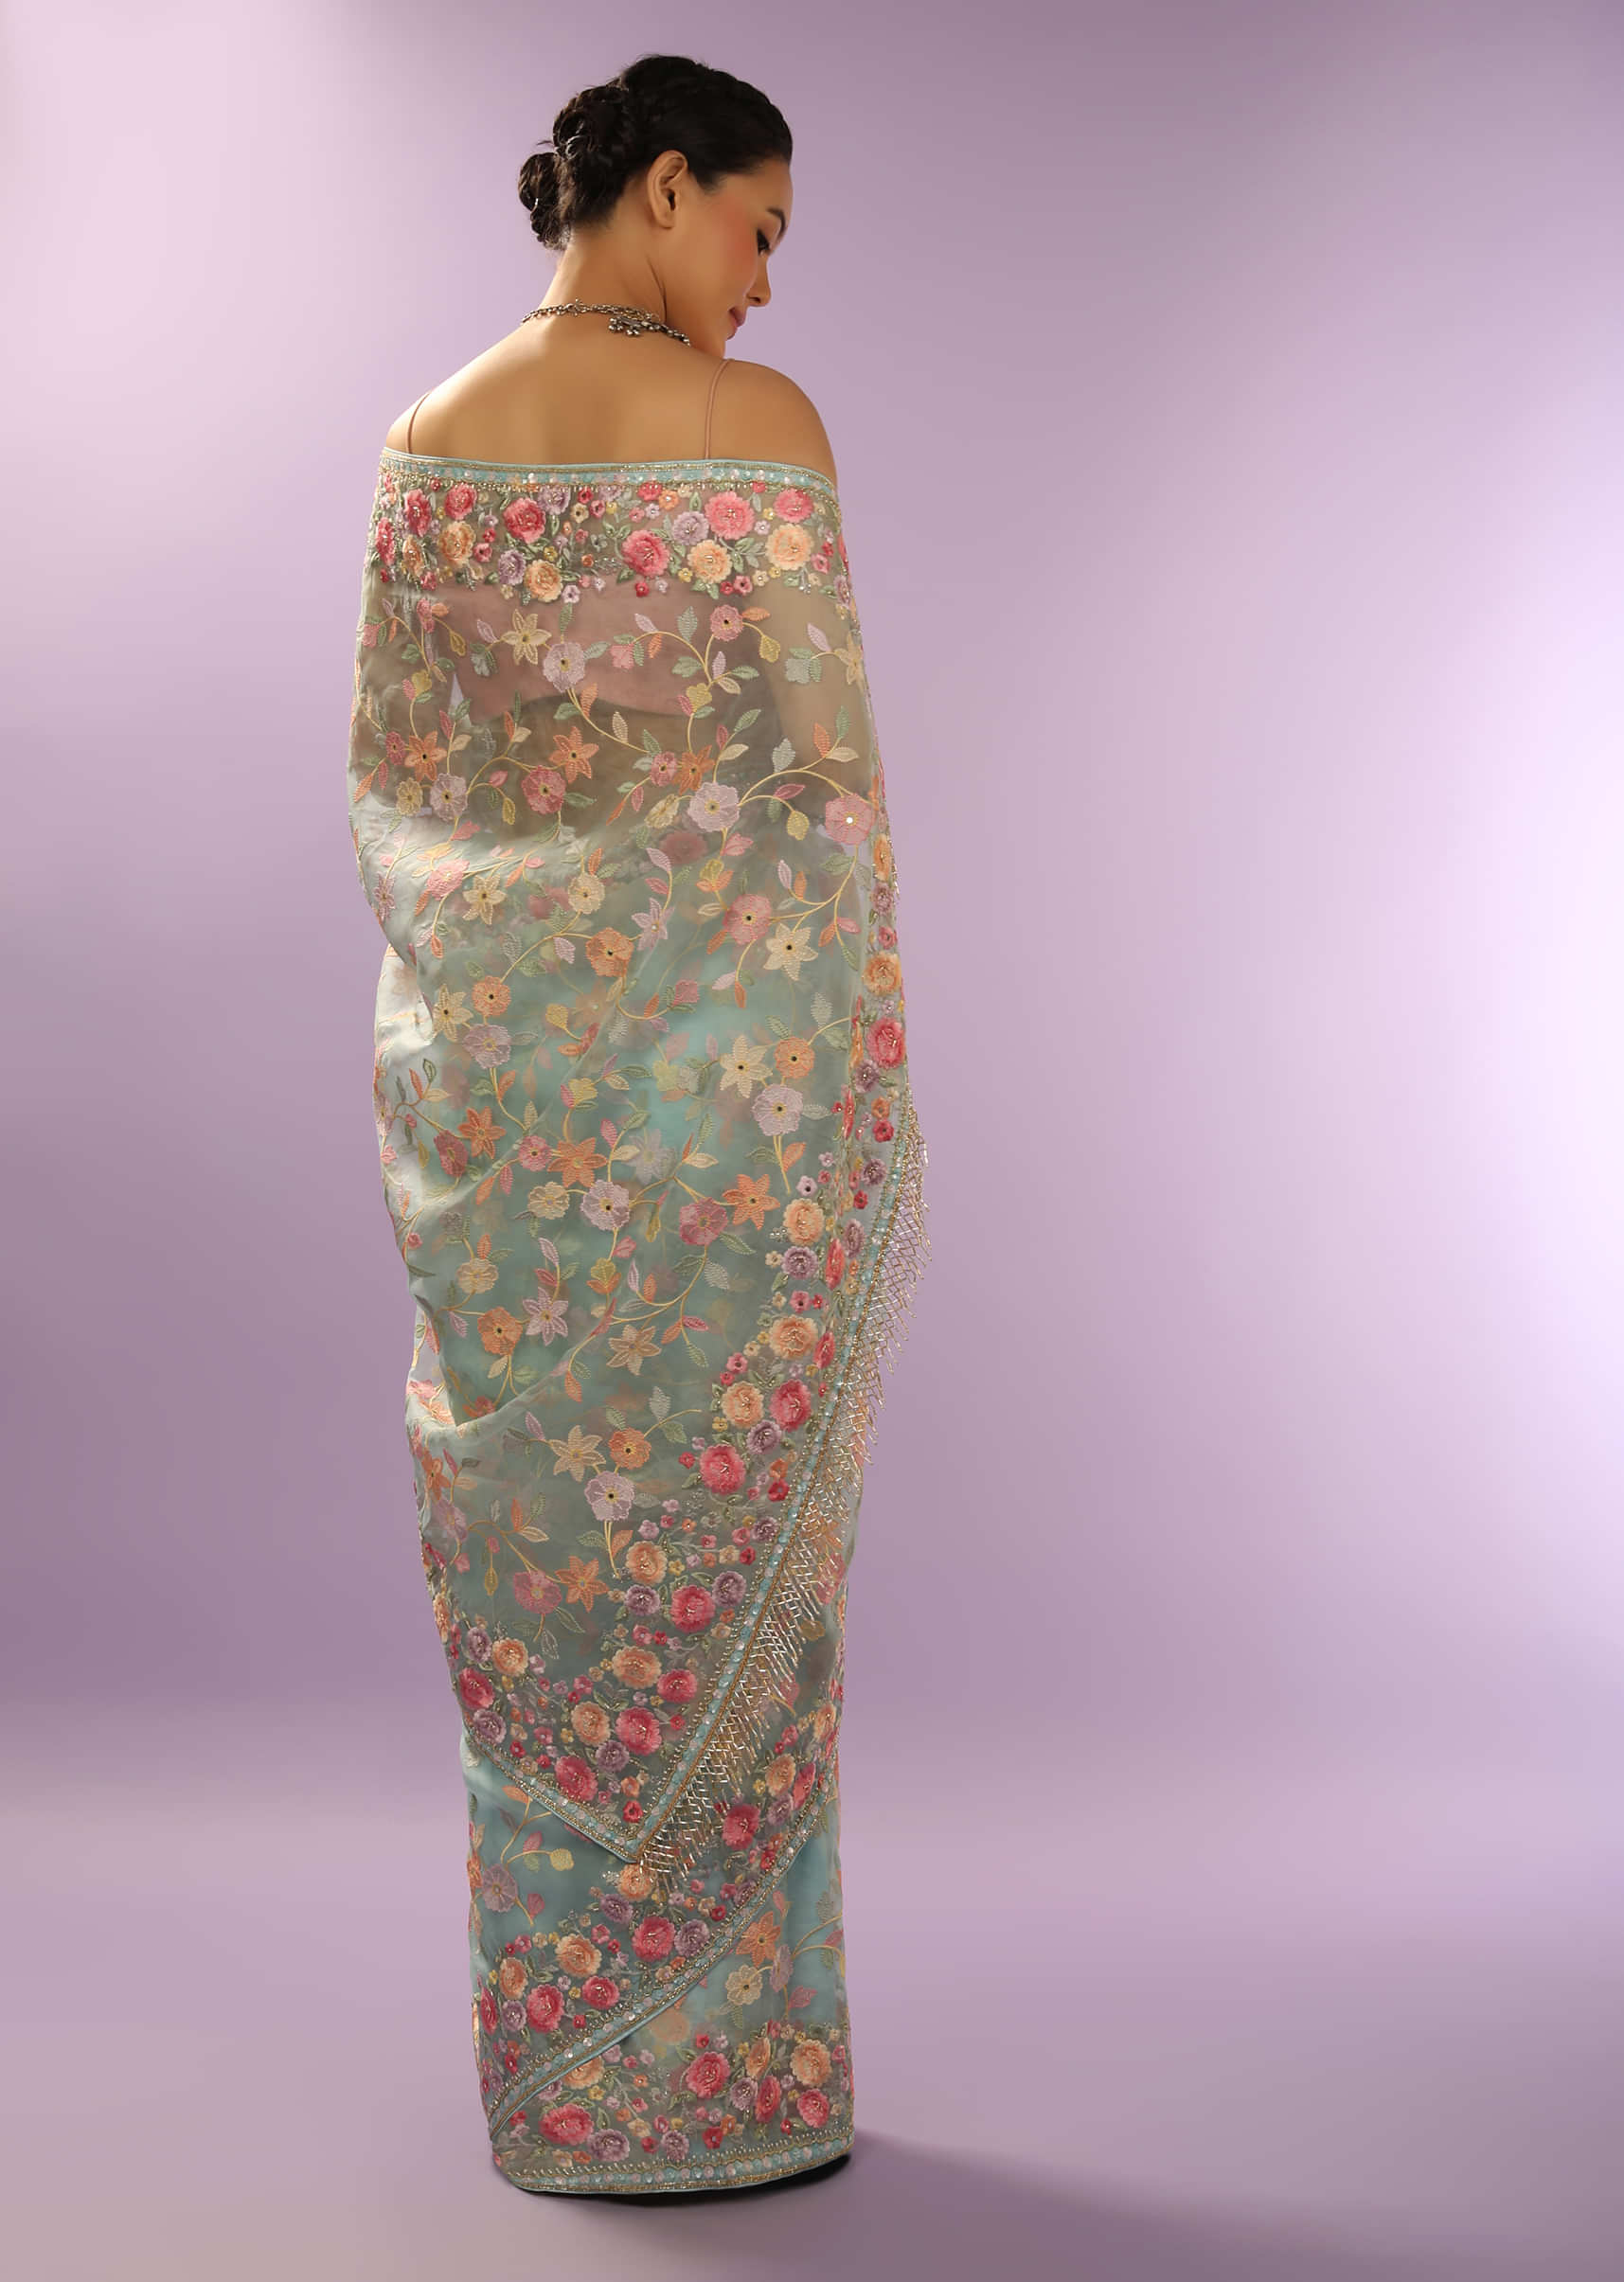 Sky Blue Saree In Organza With Multi Colored Resham Embroidered Floral Jaal And Cut Dana Work  